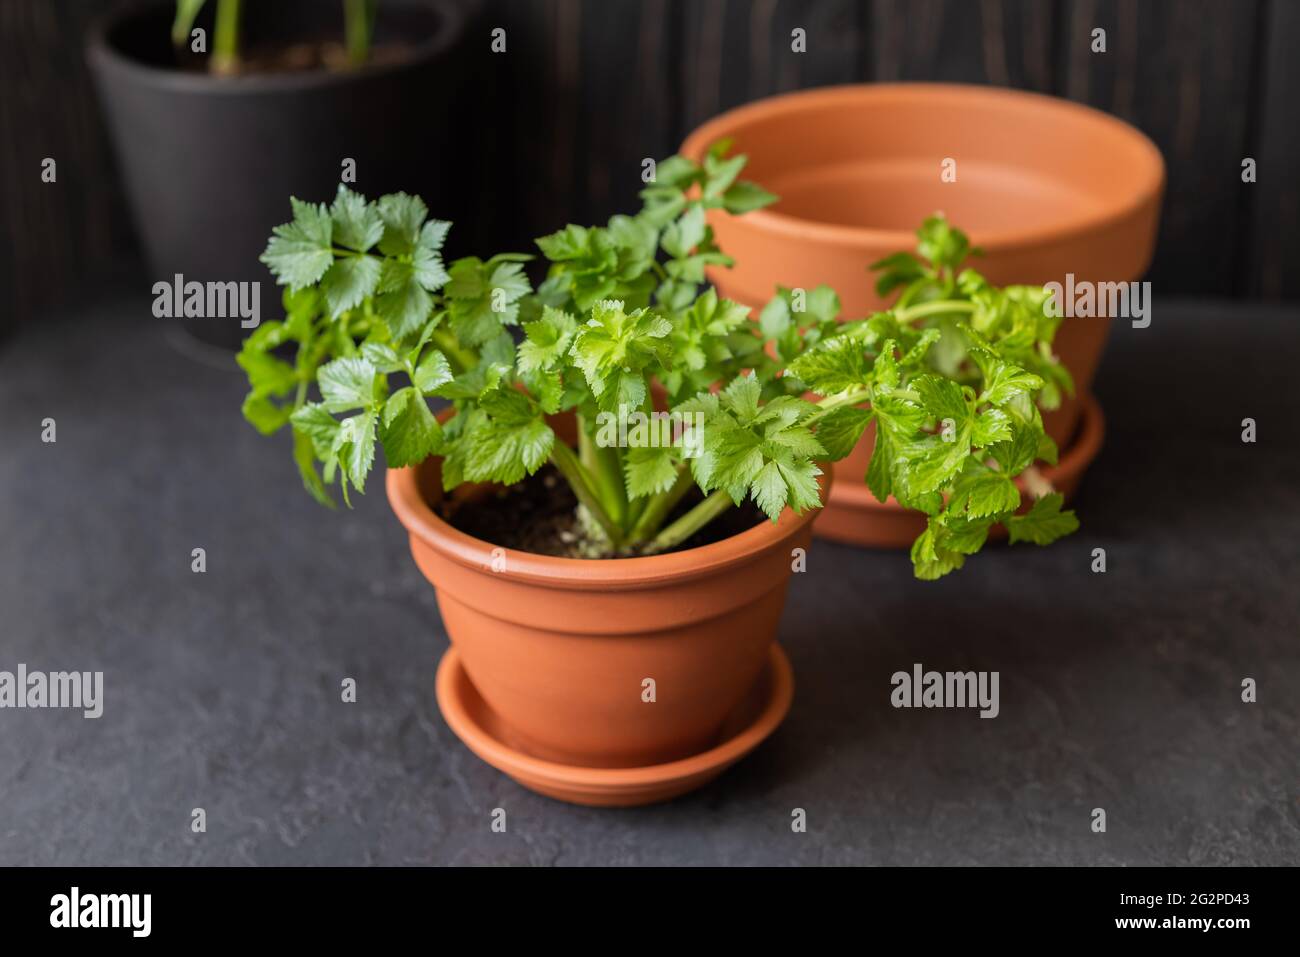 Home plants. Young celery plant growing in a pot. Gardening in the house. Stock Photo